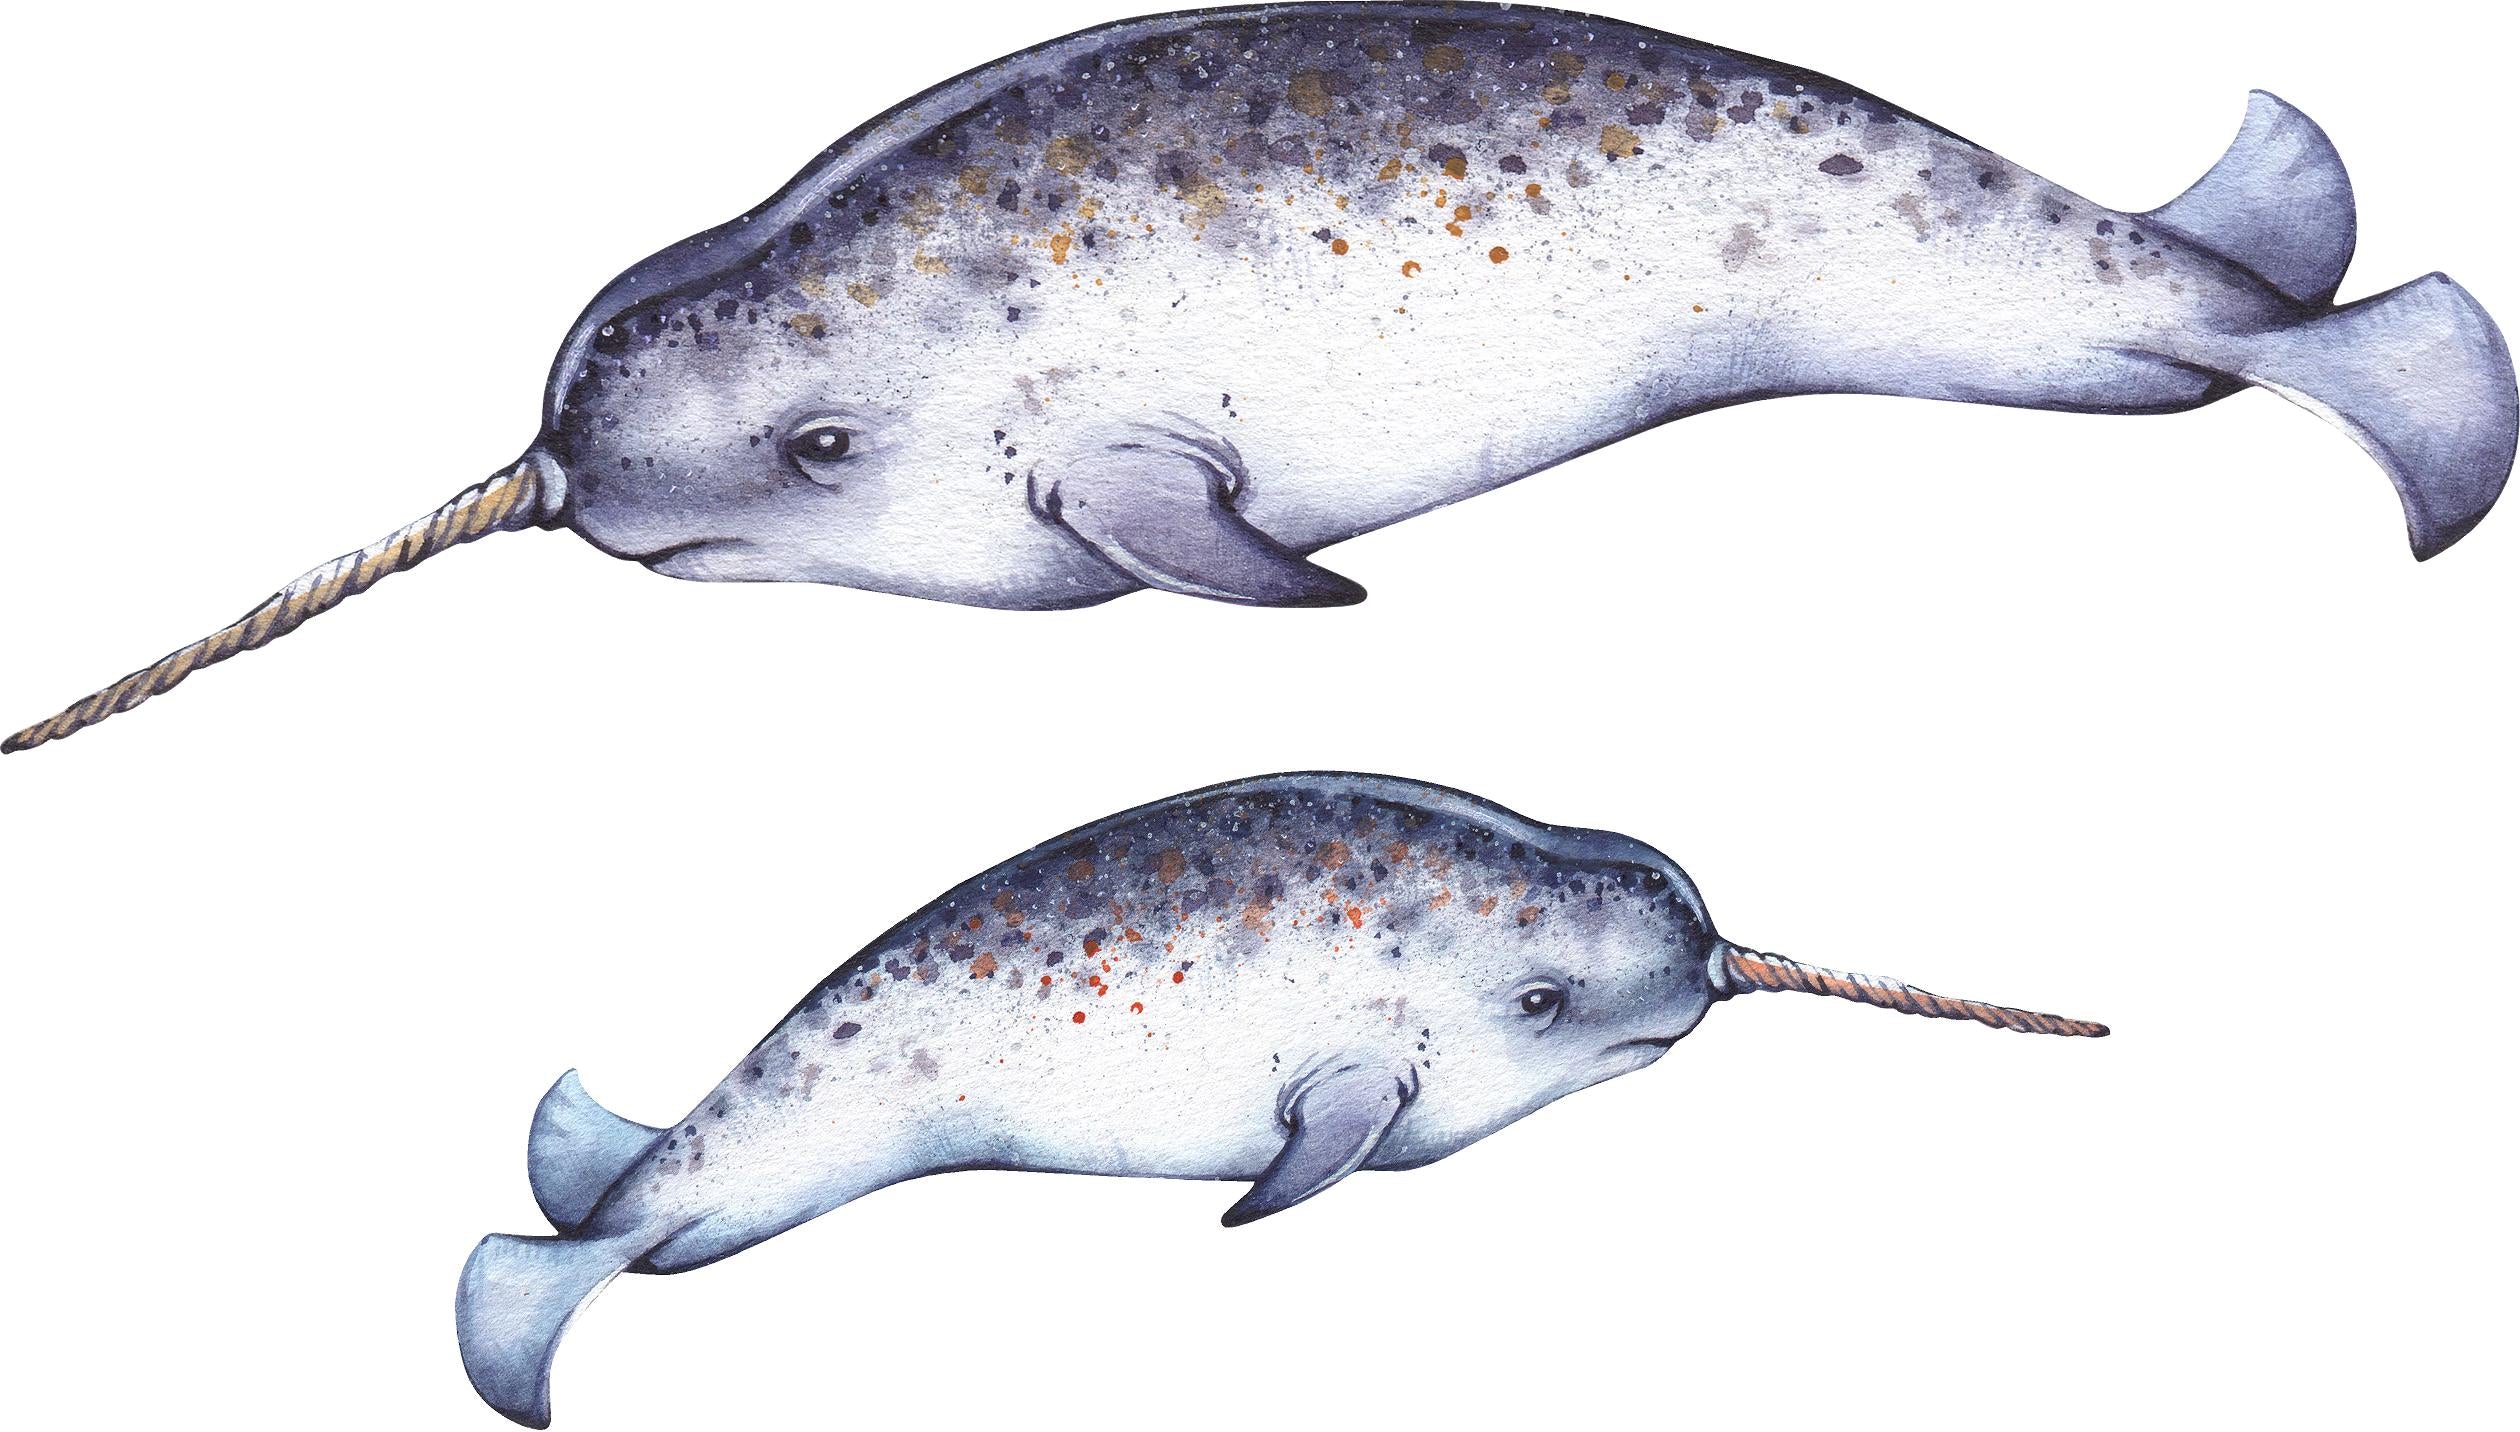 Mother & Baby Narwhal Wall Decal Set of 2 Removable Fabric Vinyl Wall Stickers